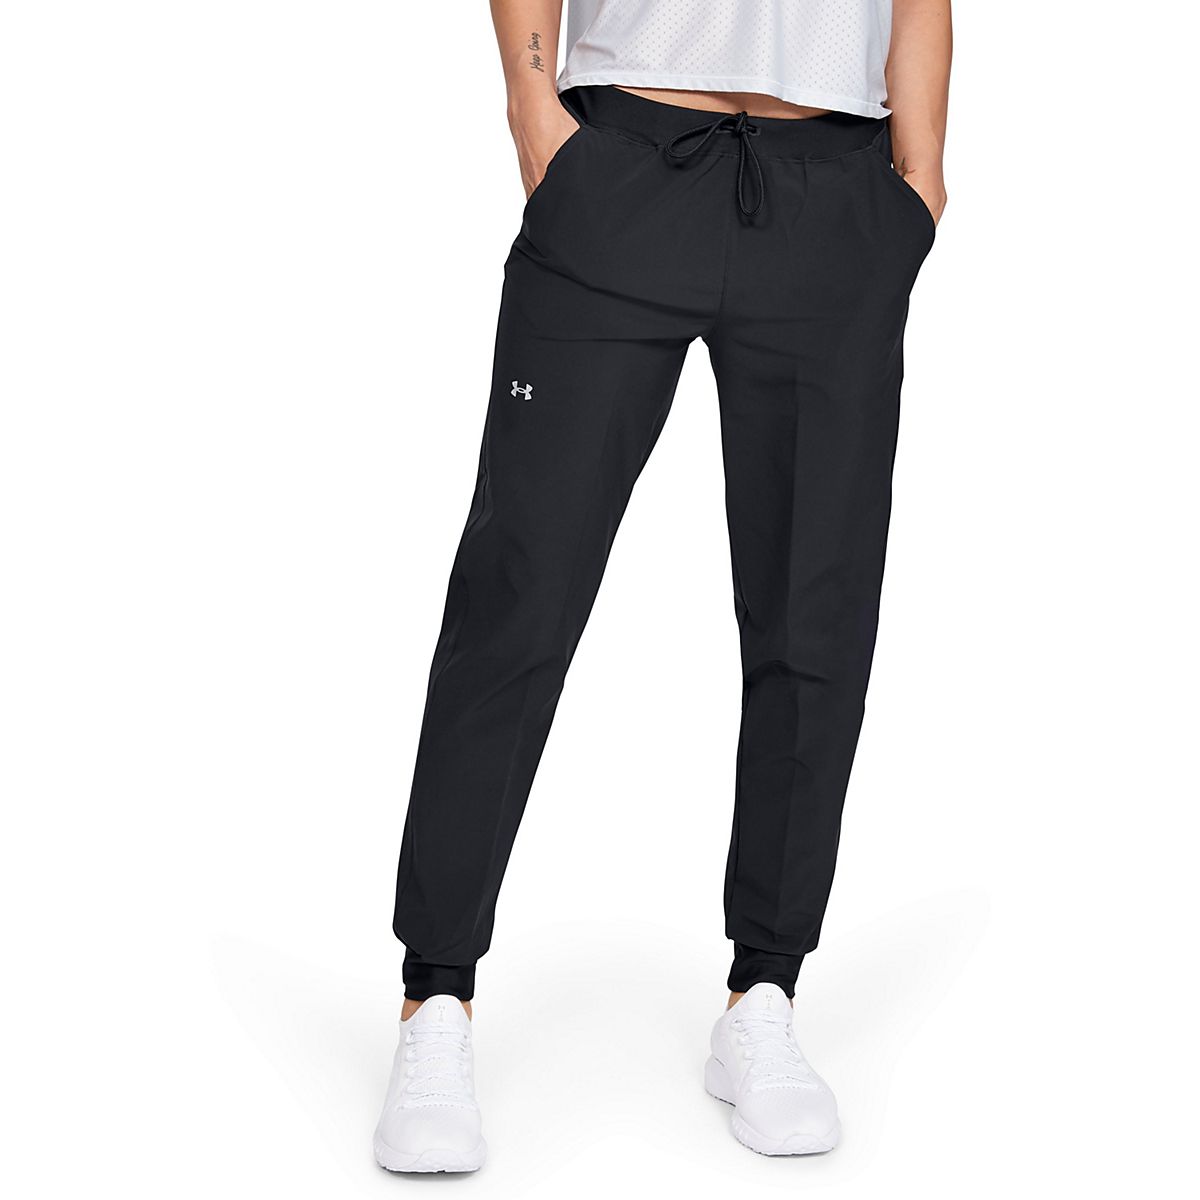 Under Armour Womens Straight Leg Pants Active Yoga Workout Casual